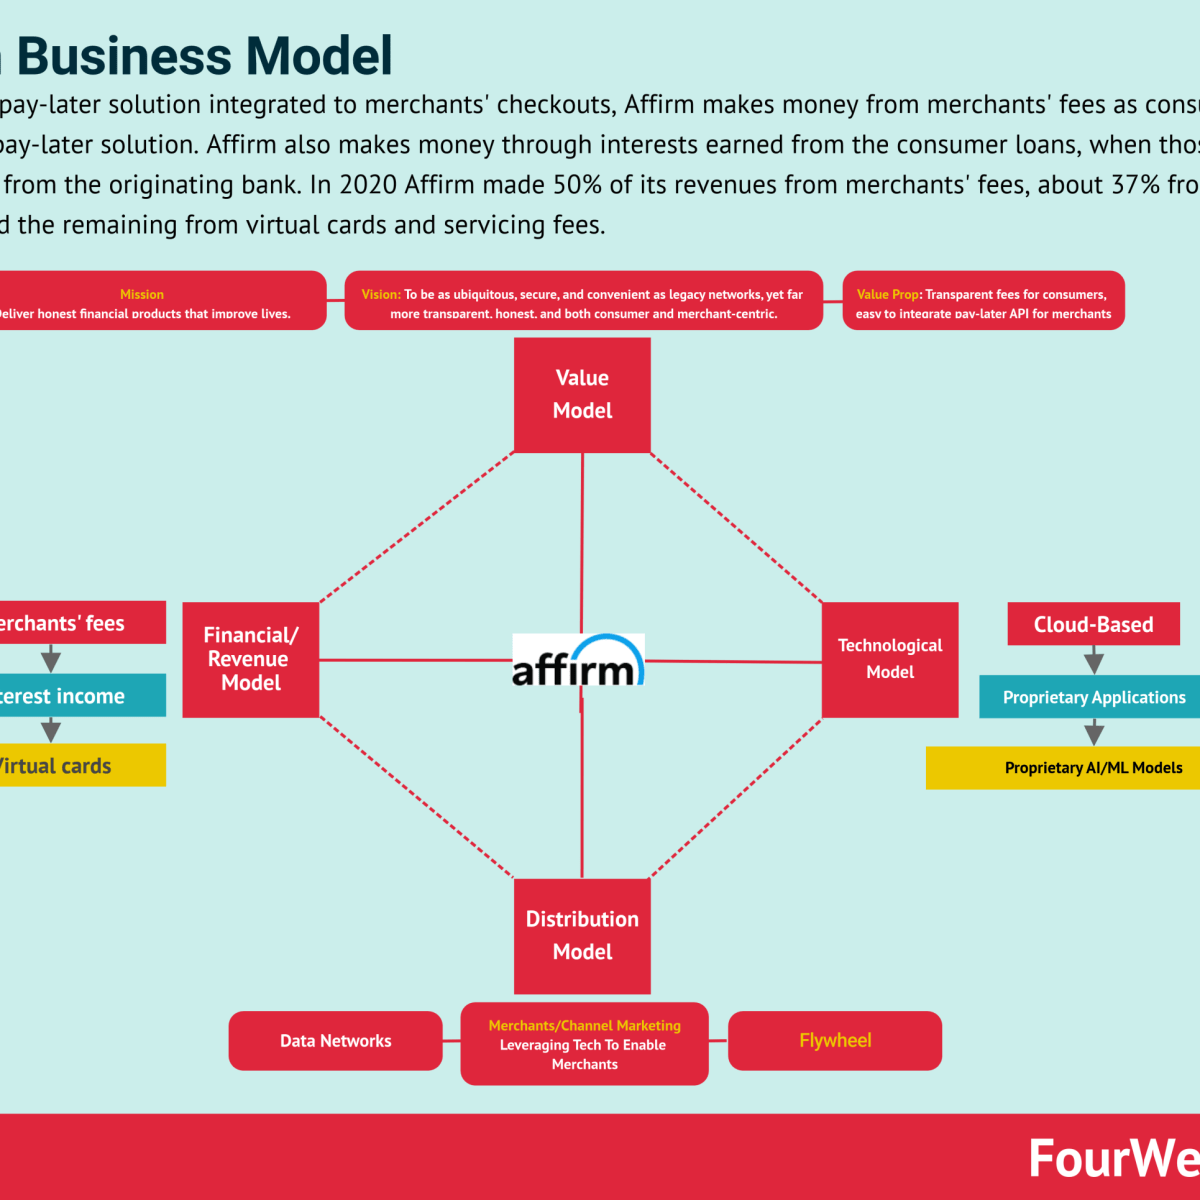 How Does Affirm Make Money? Affirm Business Model Analysis - FourWeekMBA